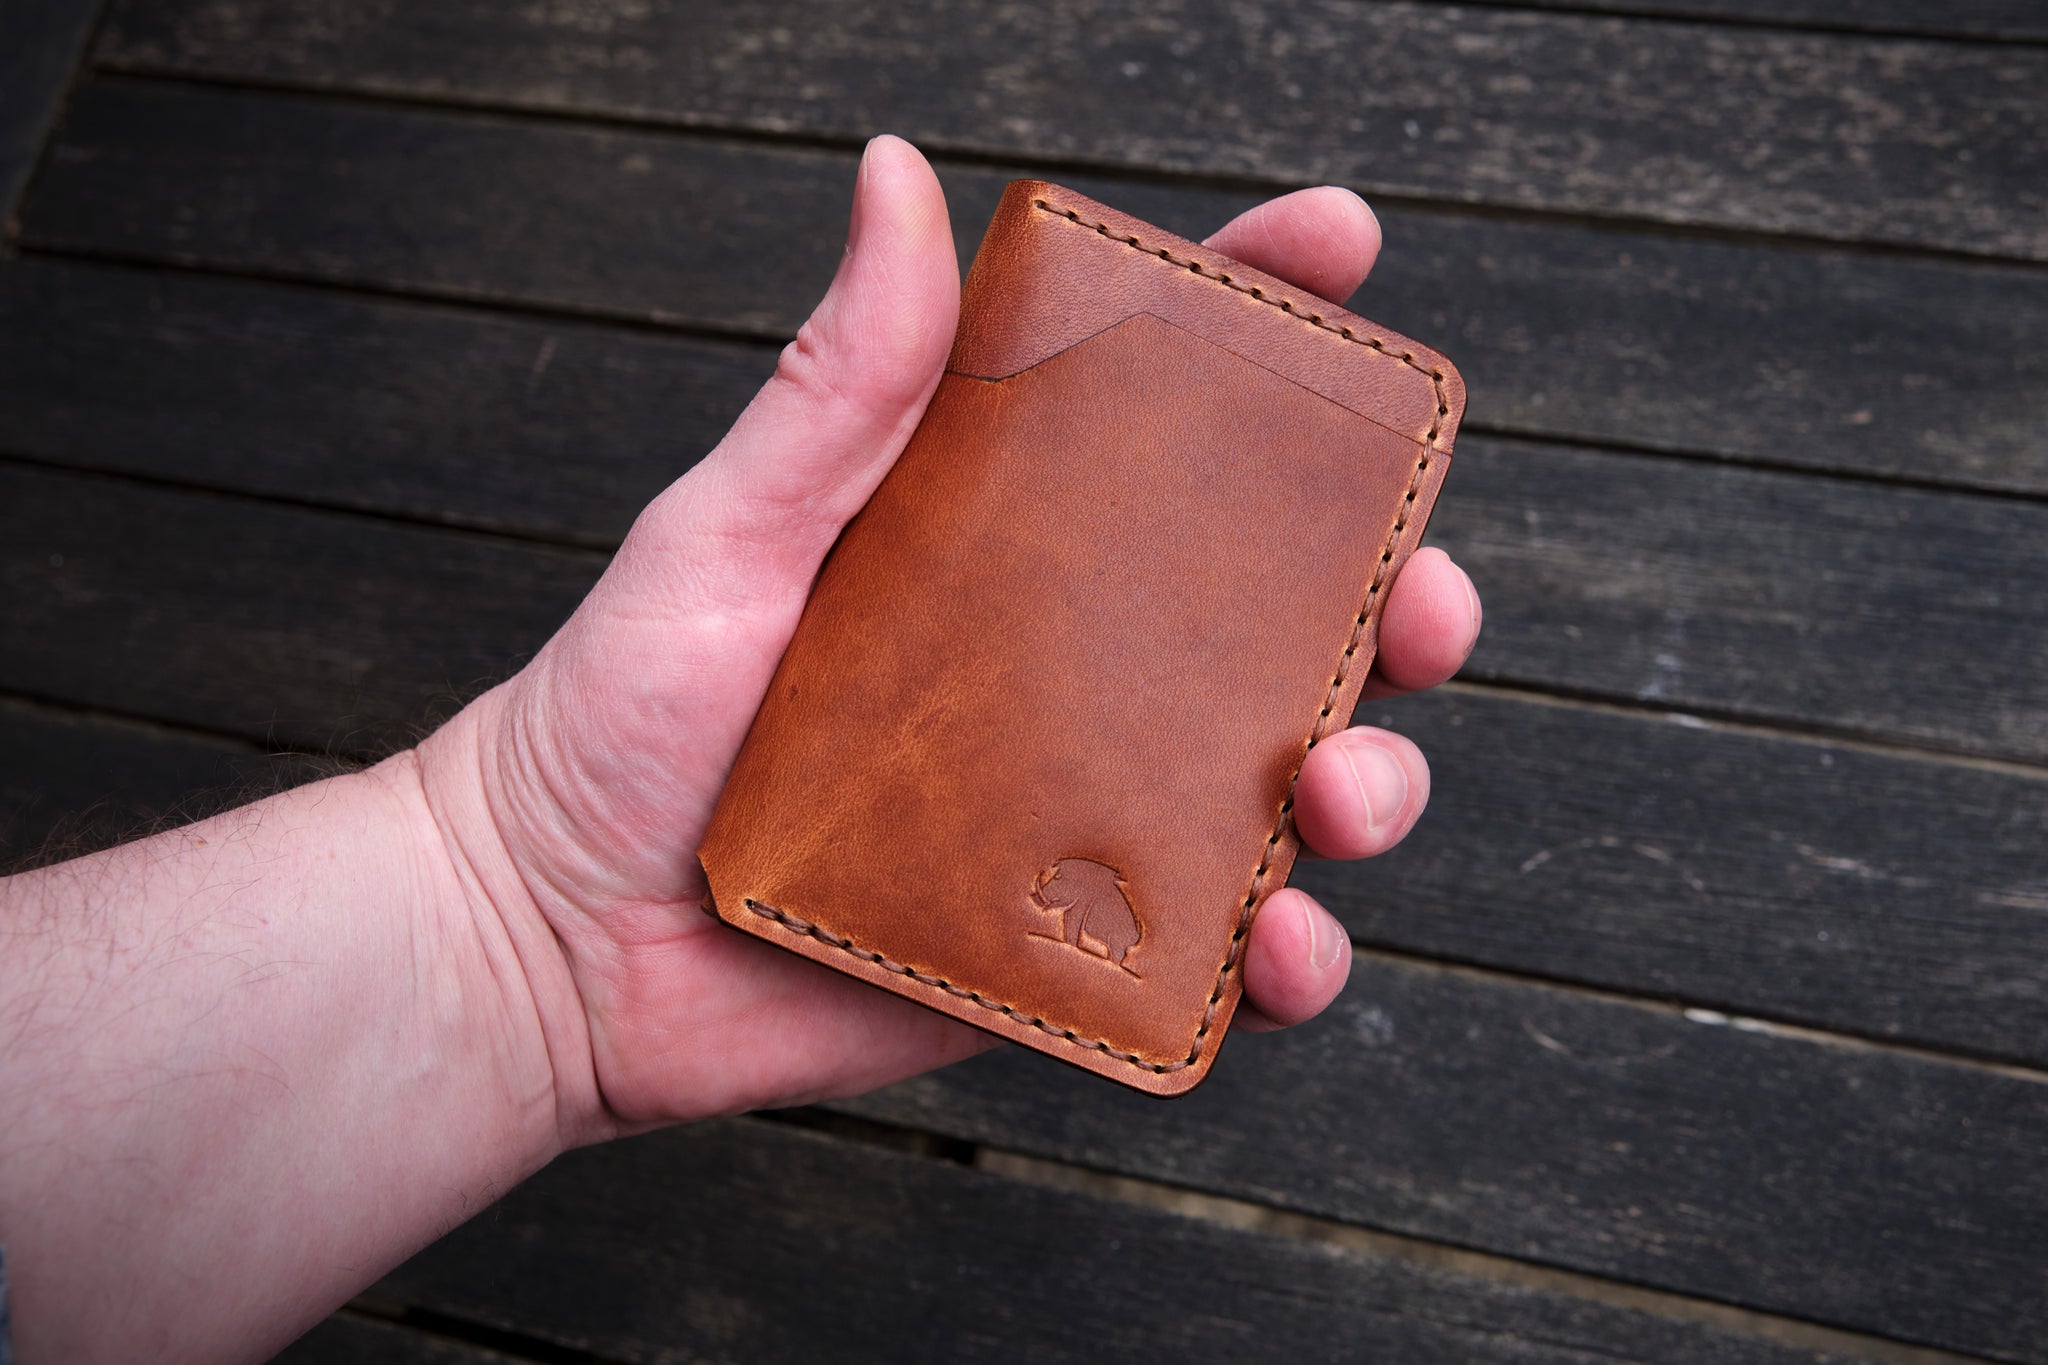 Men's Wallet - Premium Horween Leather - 100% Made in USA